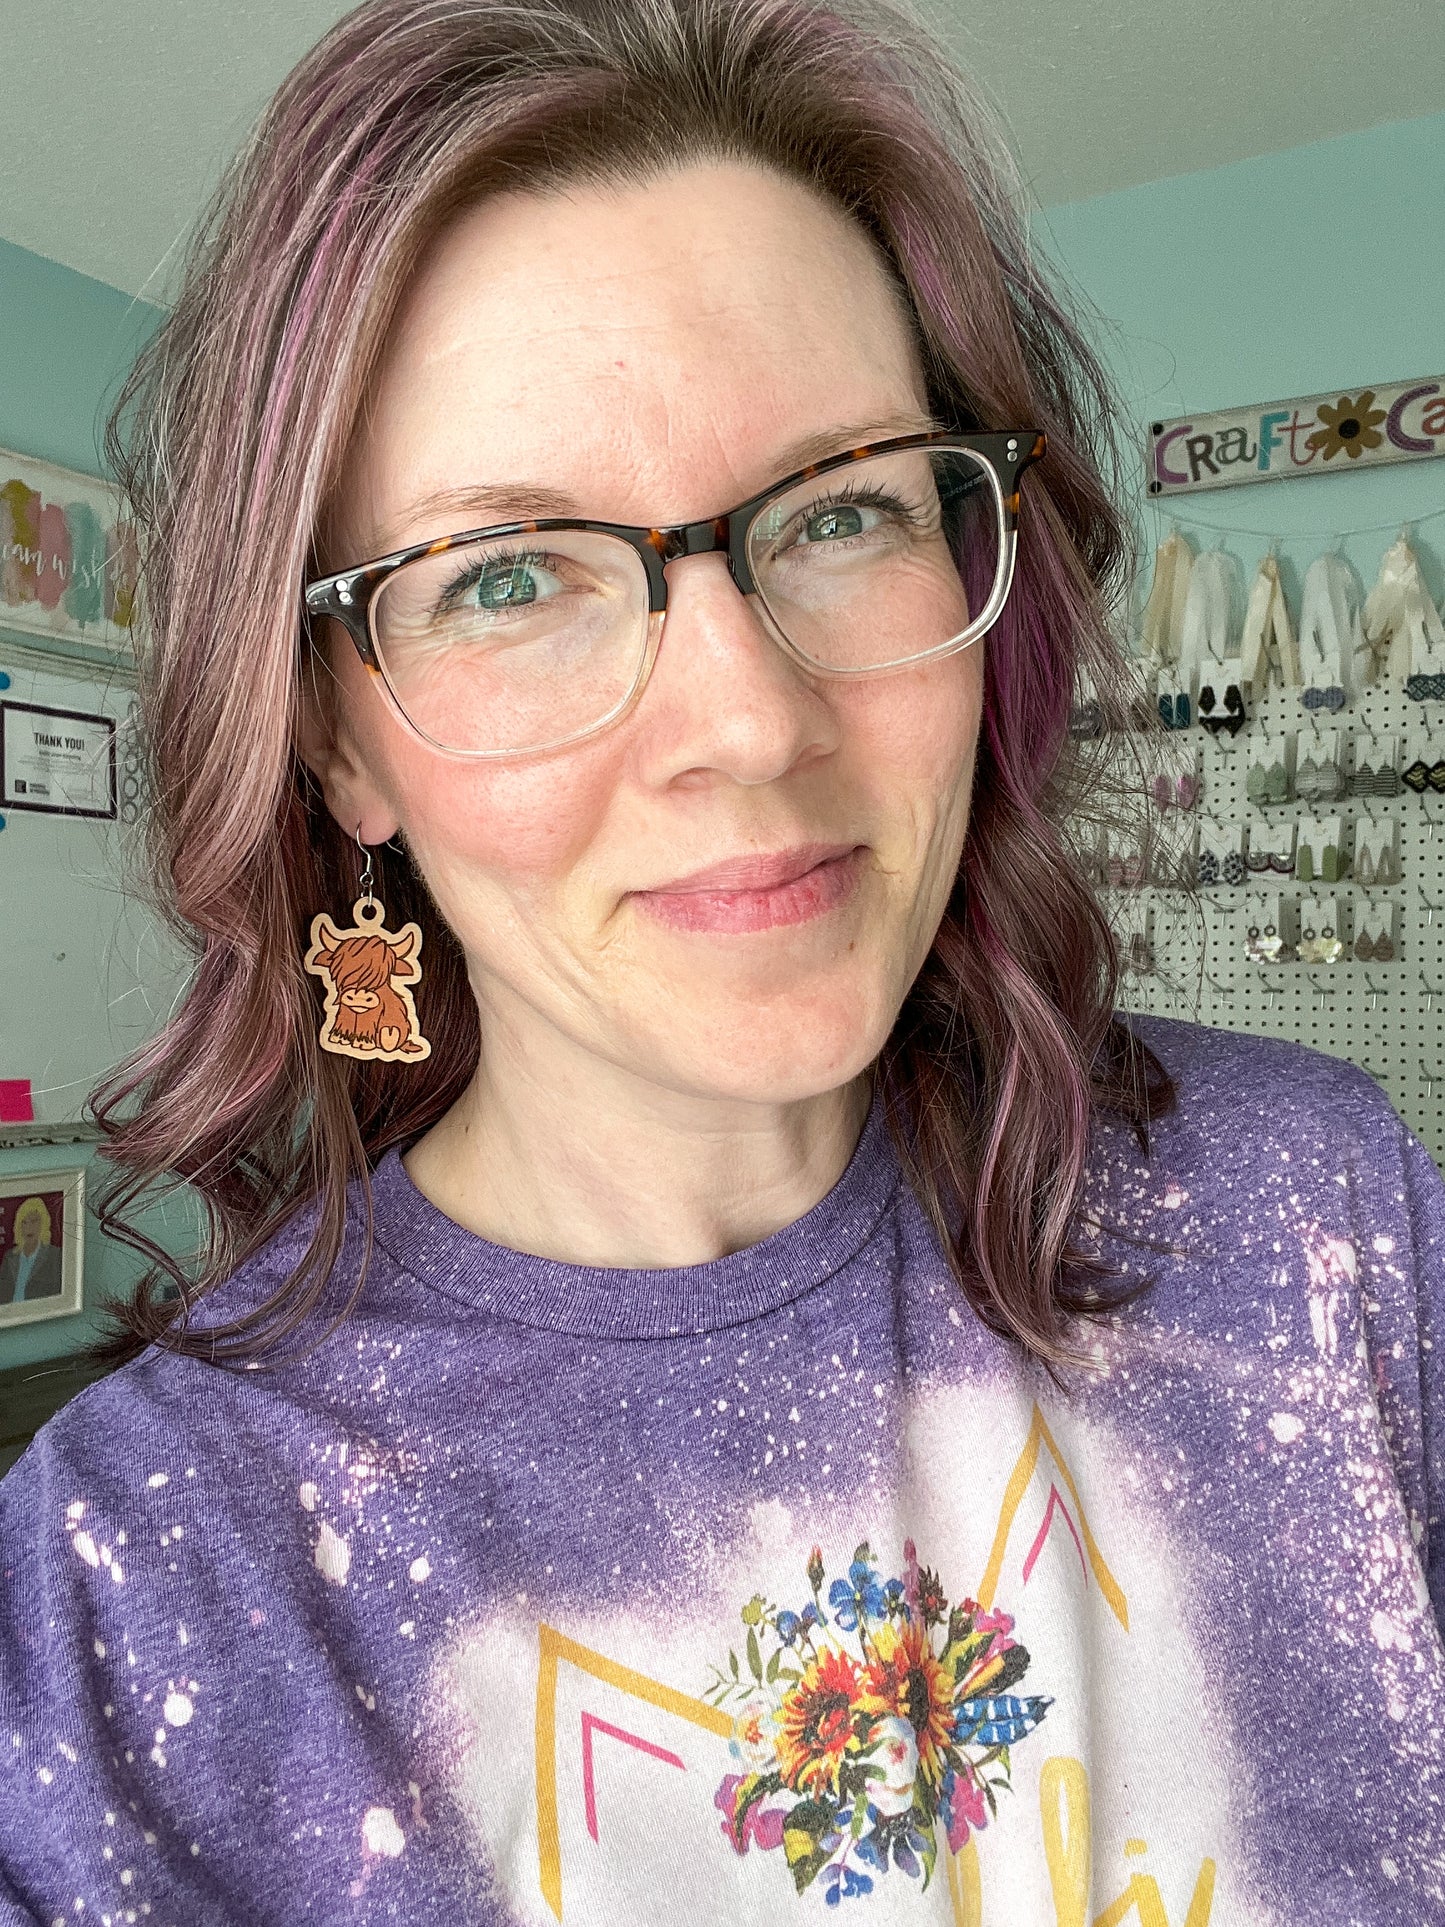 Highland Cow Hand Painted Wood Earrings: Choose from 3 Sizes